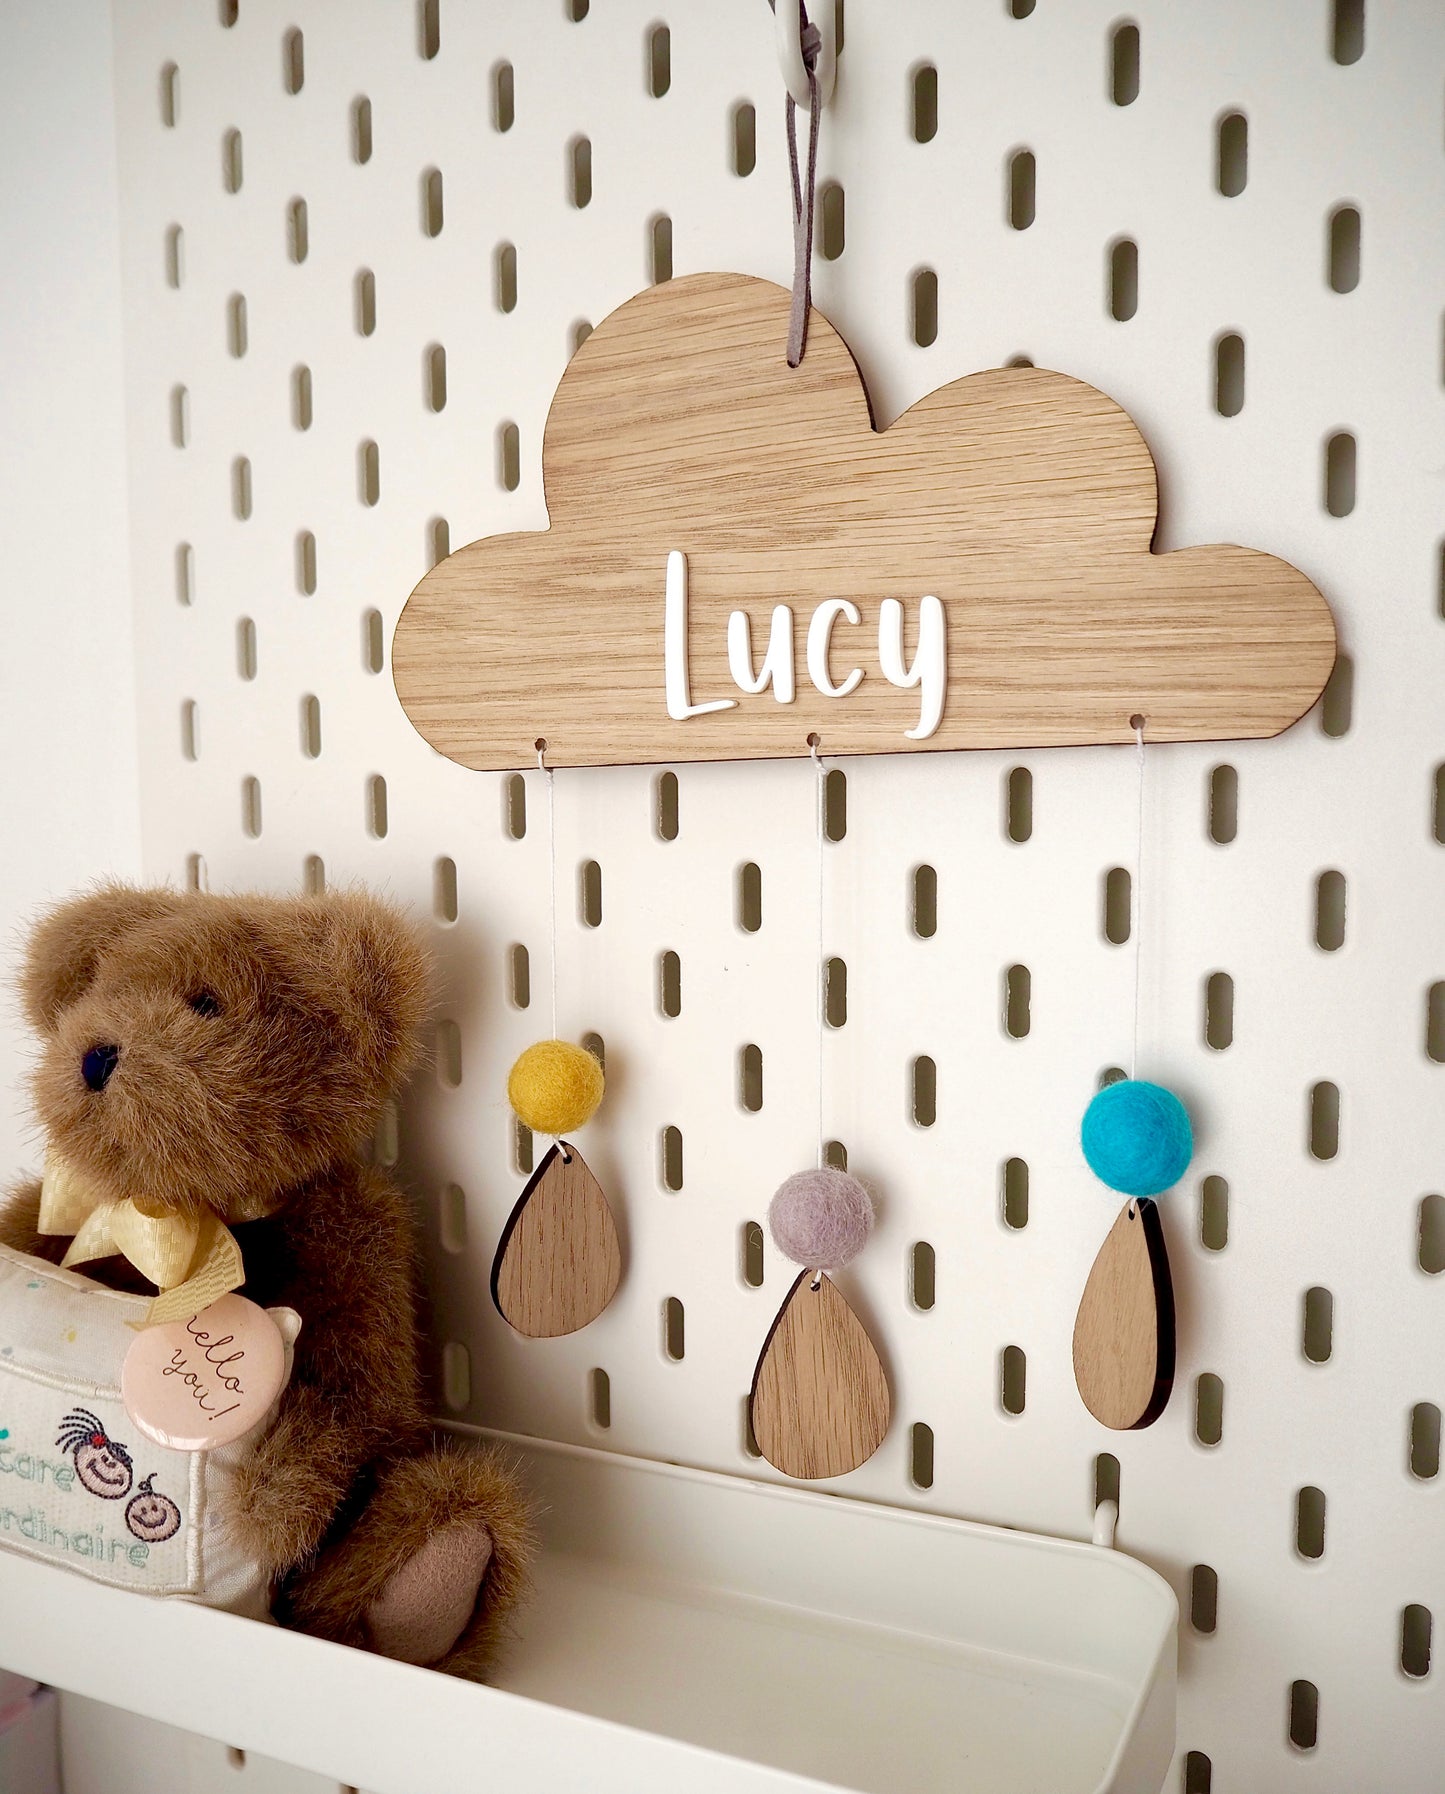 Wooden cloud with wooden raindrops and felt pom poms. Personalised name on cloud in acrylic letters